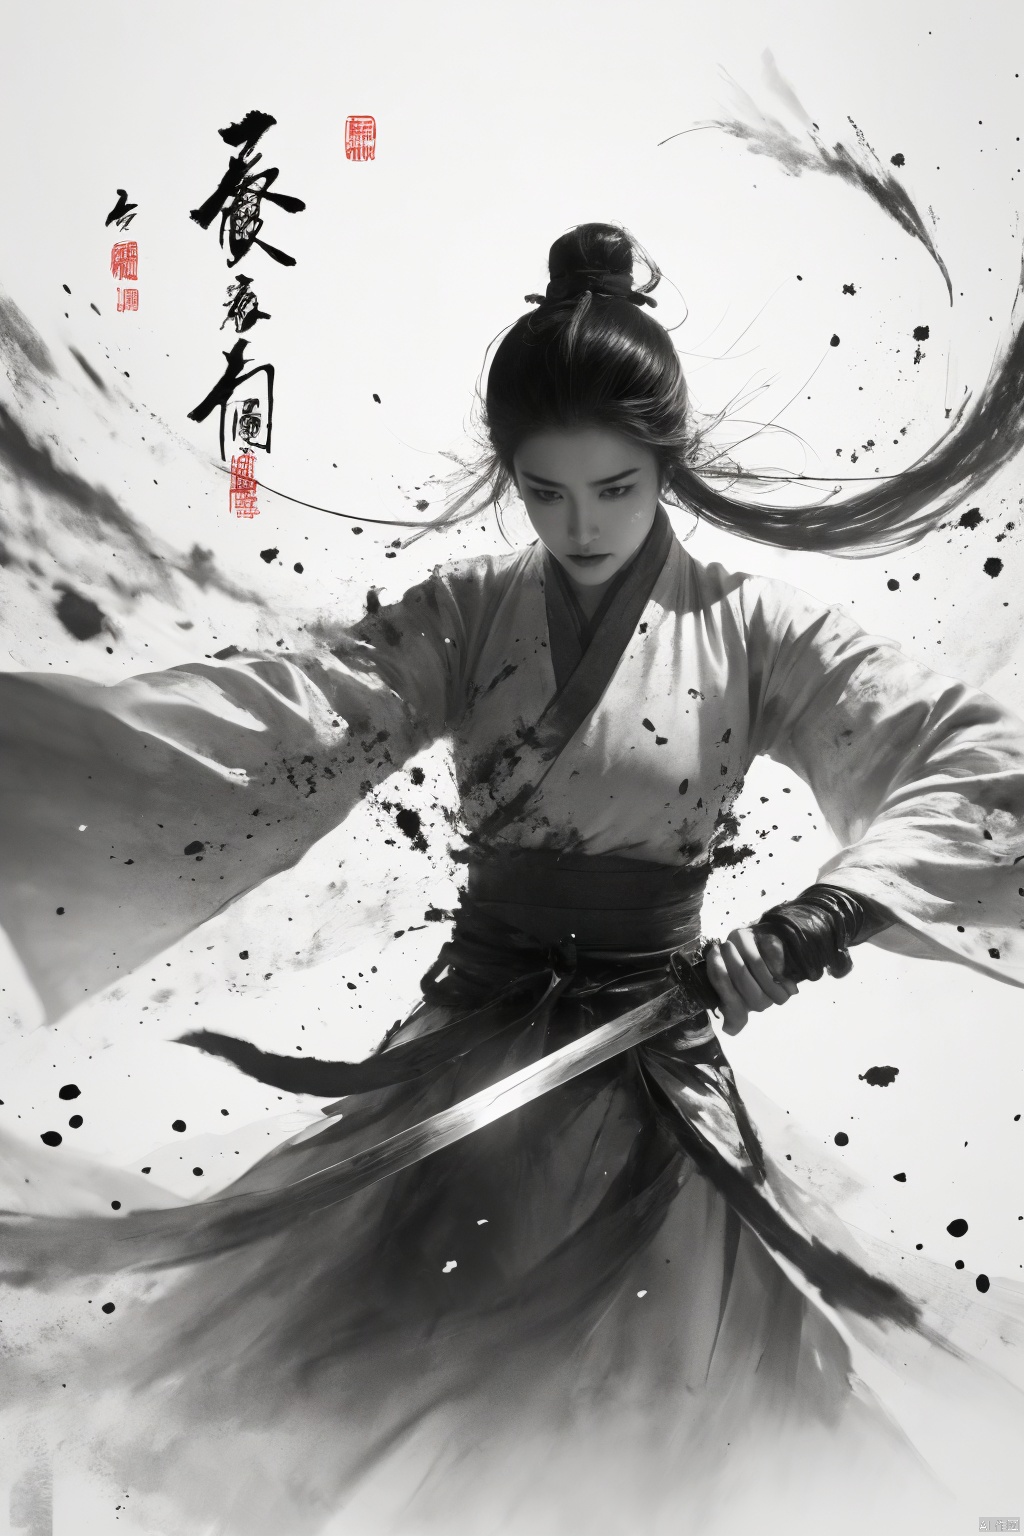  a girl, smwuxia,chinese text,blood, weapon:sw,blood splatter,motion blur,text, Daofa Rune, Ink scattering_Chinese style